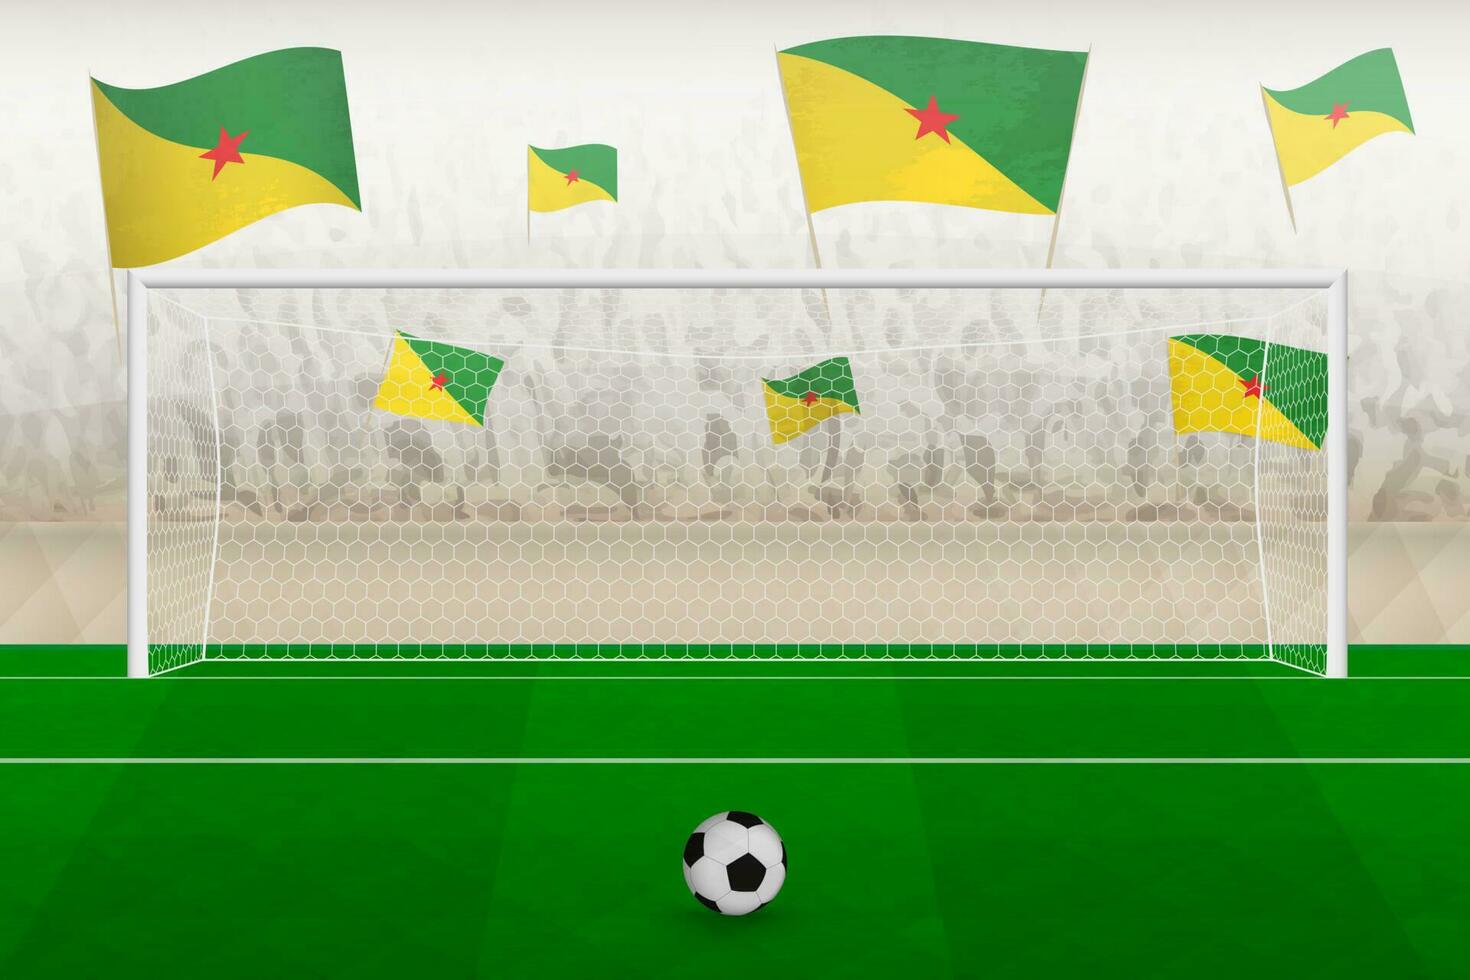 French Guiana football team fans with flags of French Guiana cheering on stadium, penalty kick concept in a soccer match. vector